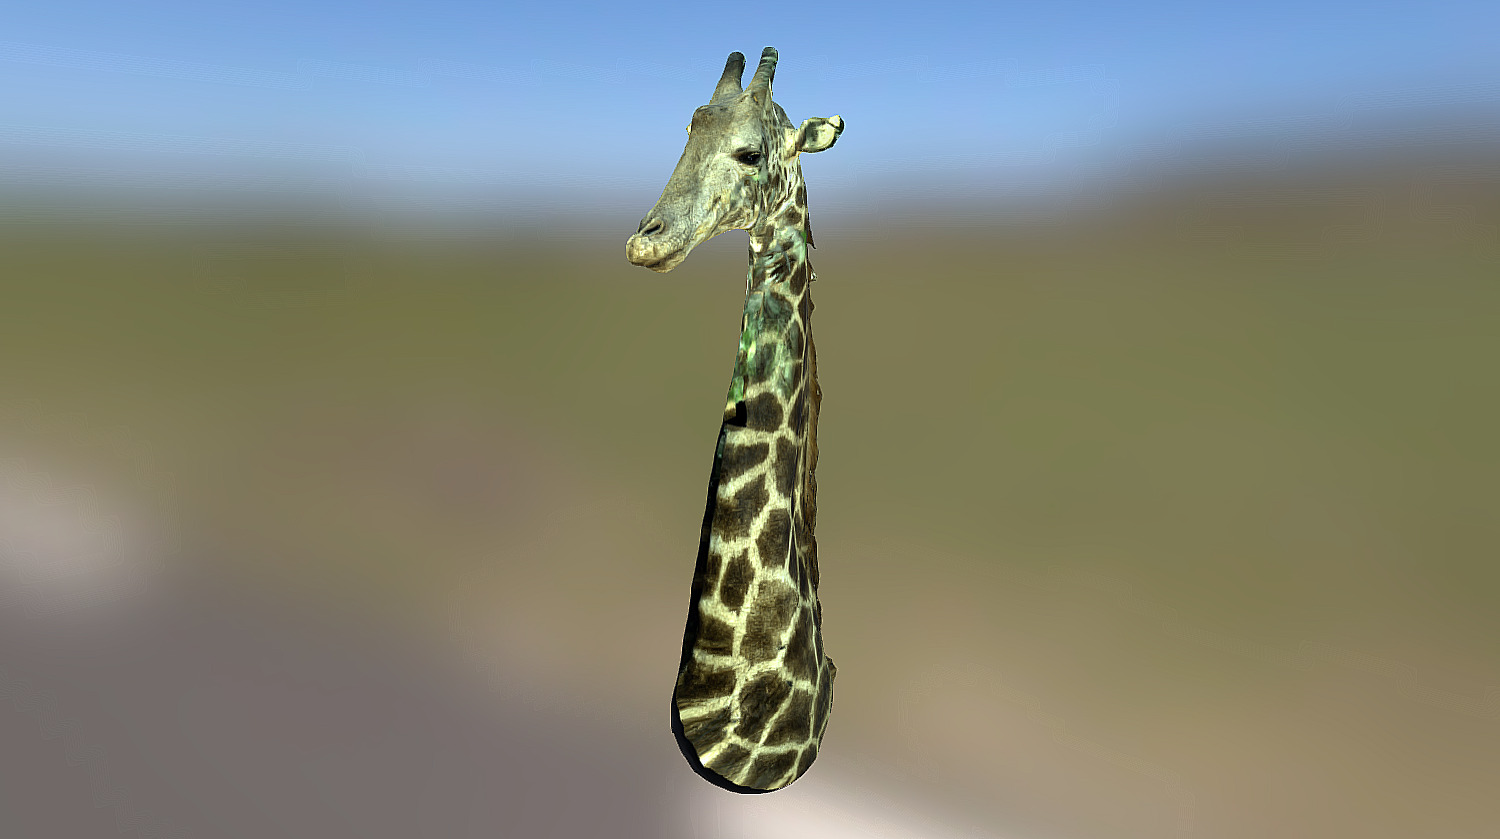 3D model of an African giraffe. This high-resolution model was scanned from the private collection of Randy Cline at Oasis Outback in Uvalde, Texas. Green discolorations and missing data in some spots resulted from leafy obstructions in the taxidermied animal display 3d model